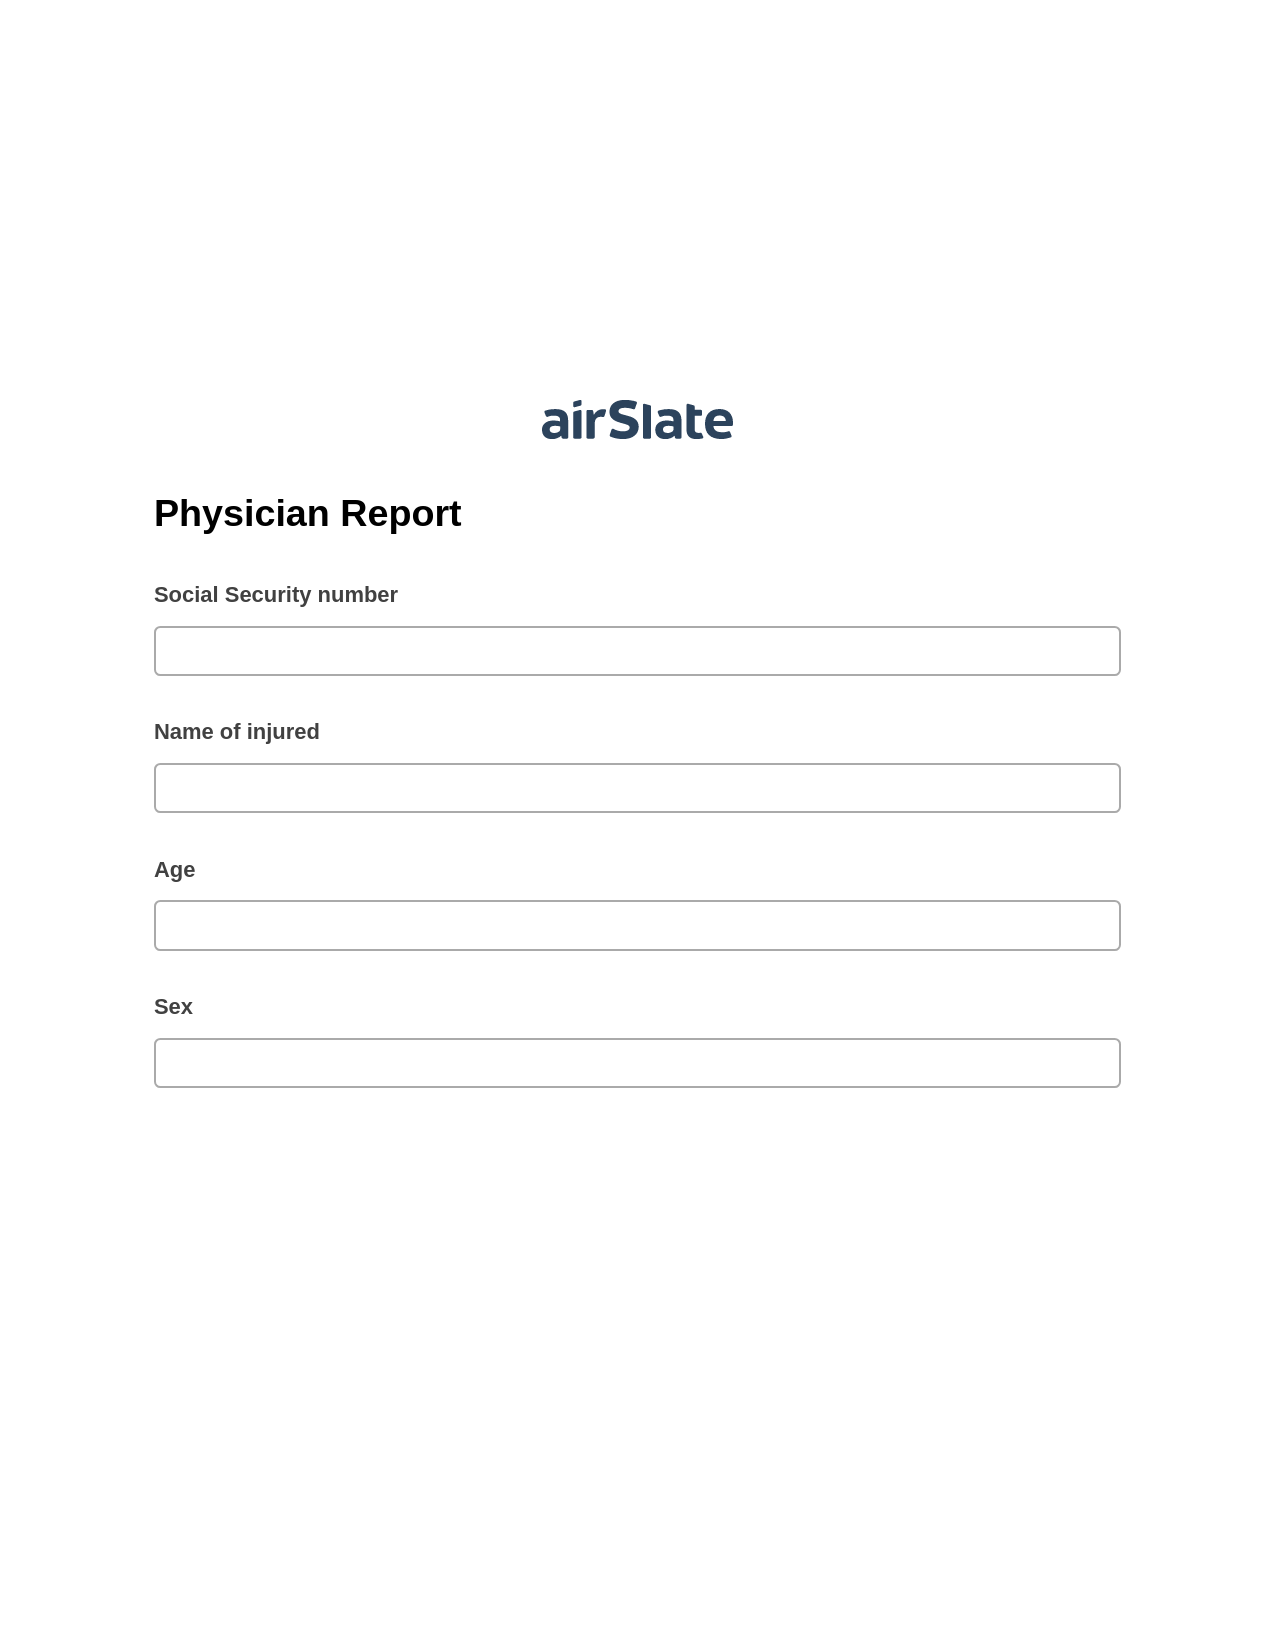 Physician Report Pre-fill from Litmos bot, Update NetSuite Record Bot, Export to WebMerge Bot